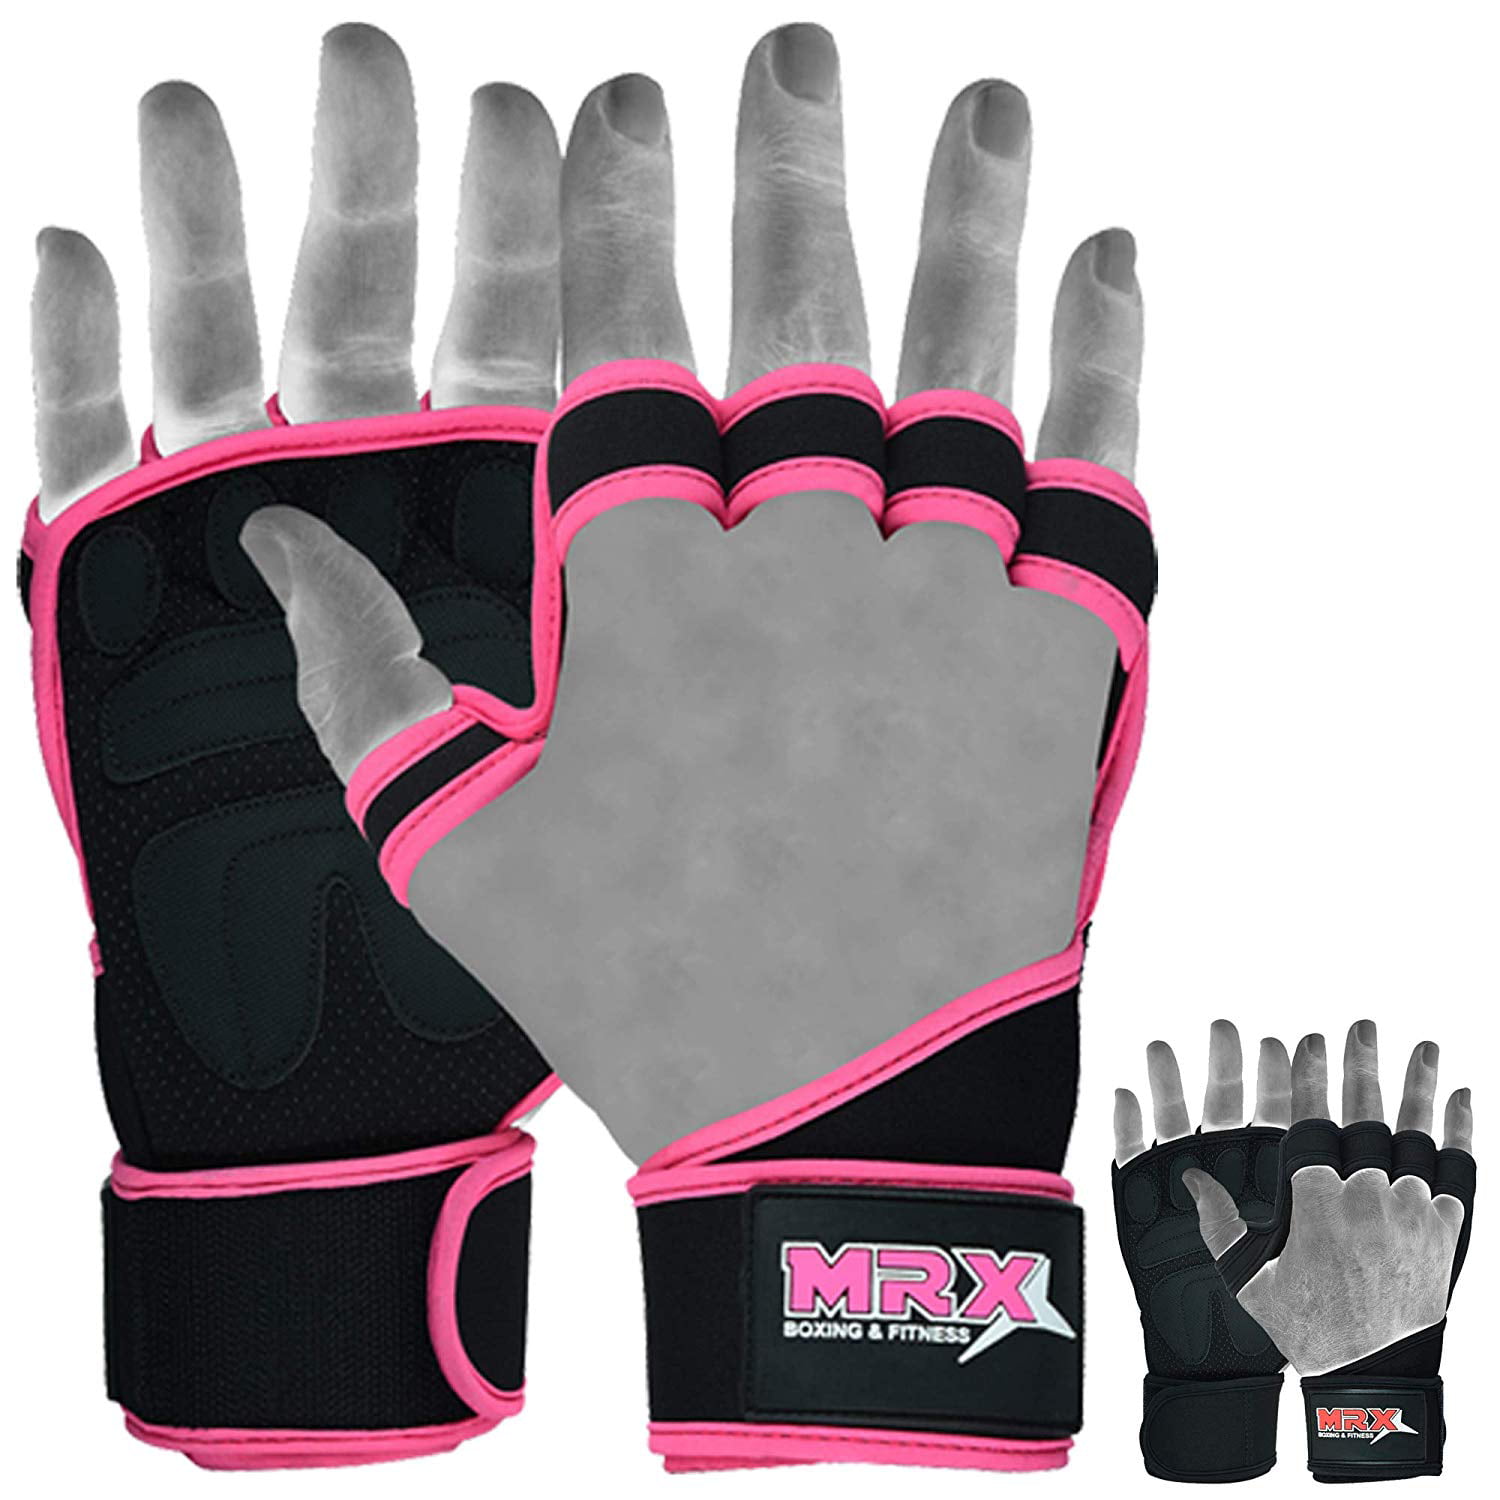 Touch of Megumi Women's Workout Gloves 